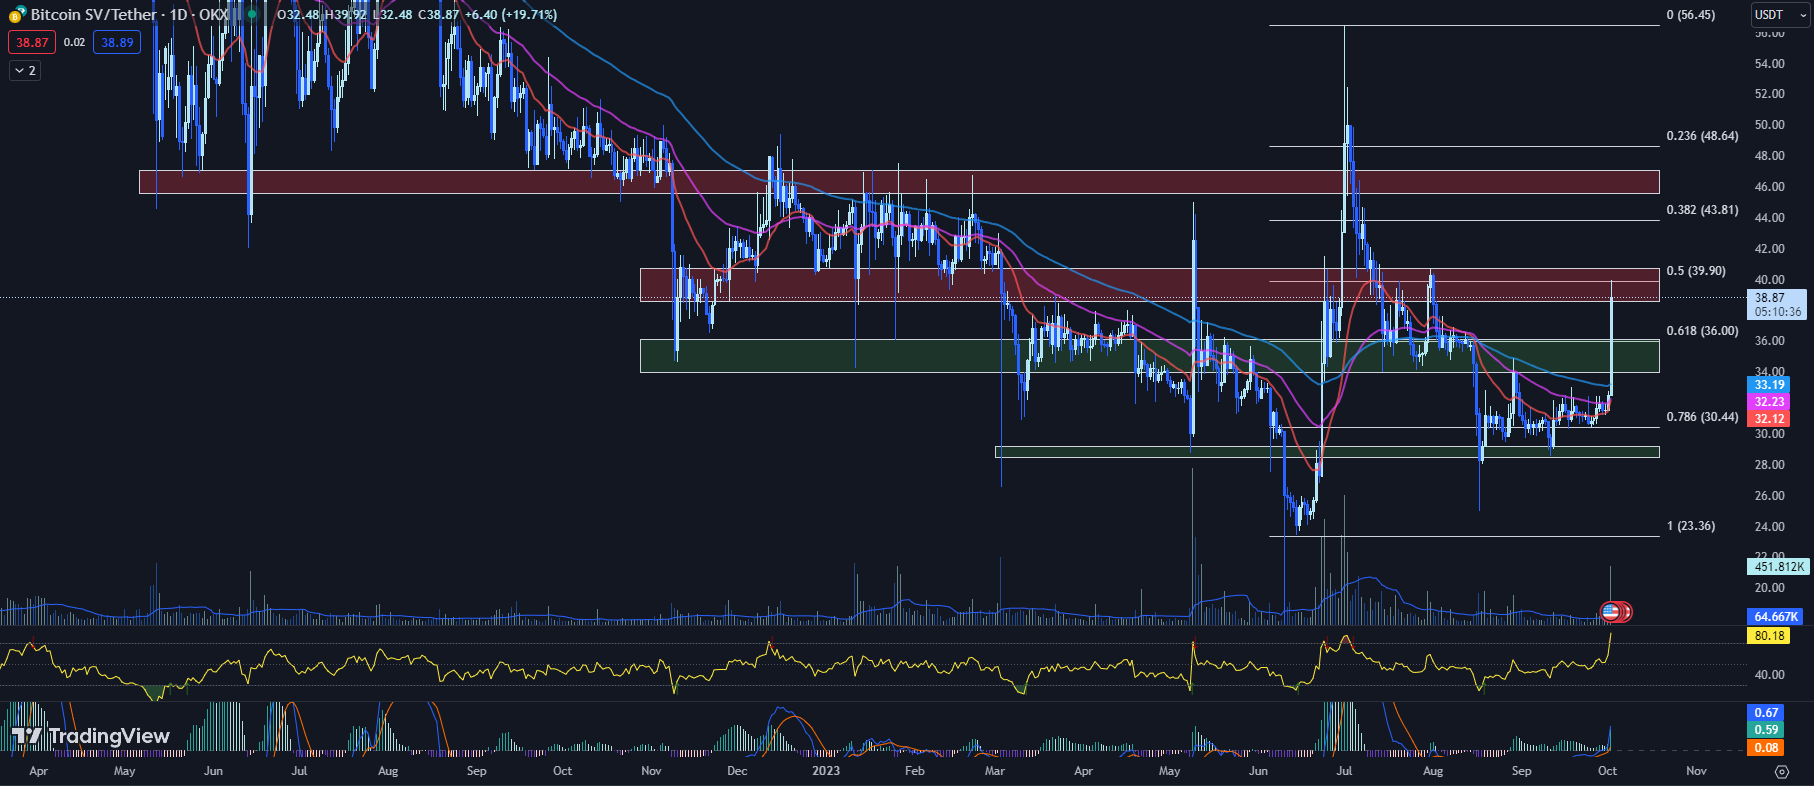 TradingView chart for the BSV price 10-02-23